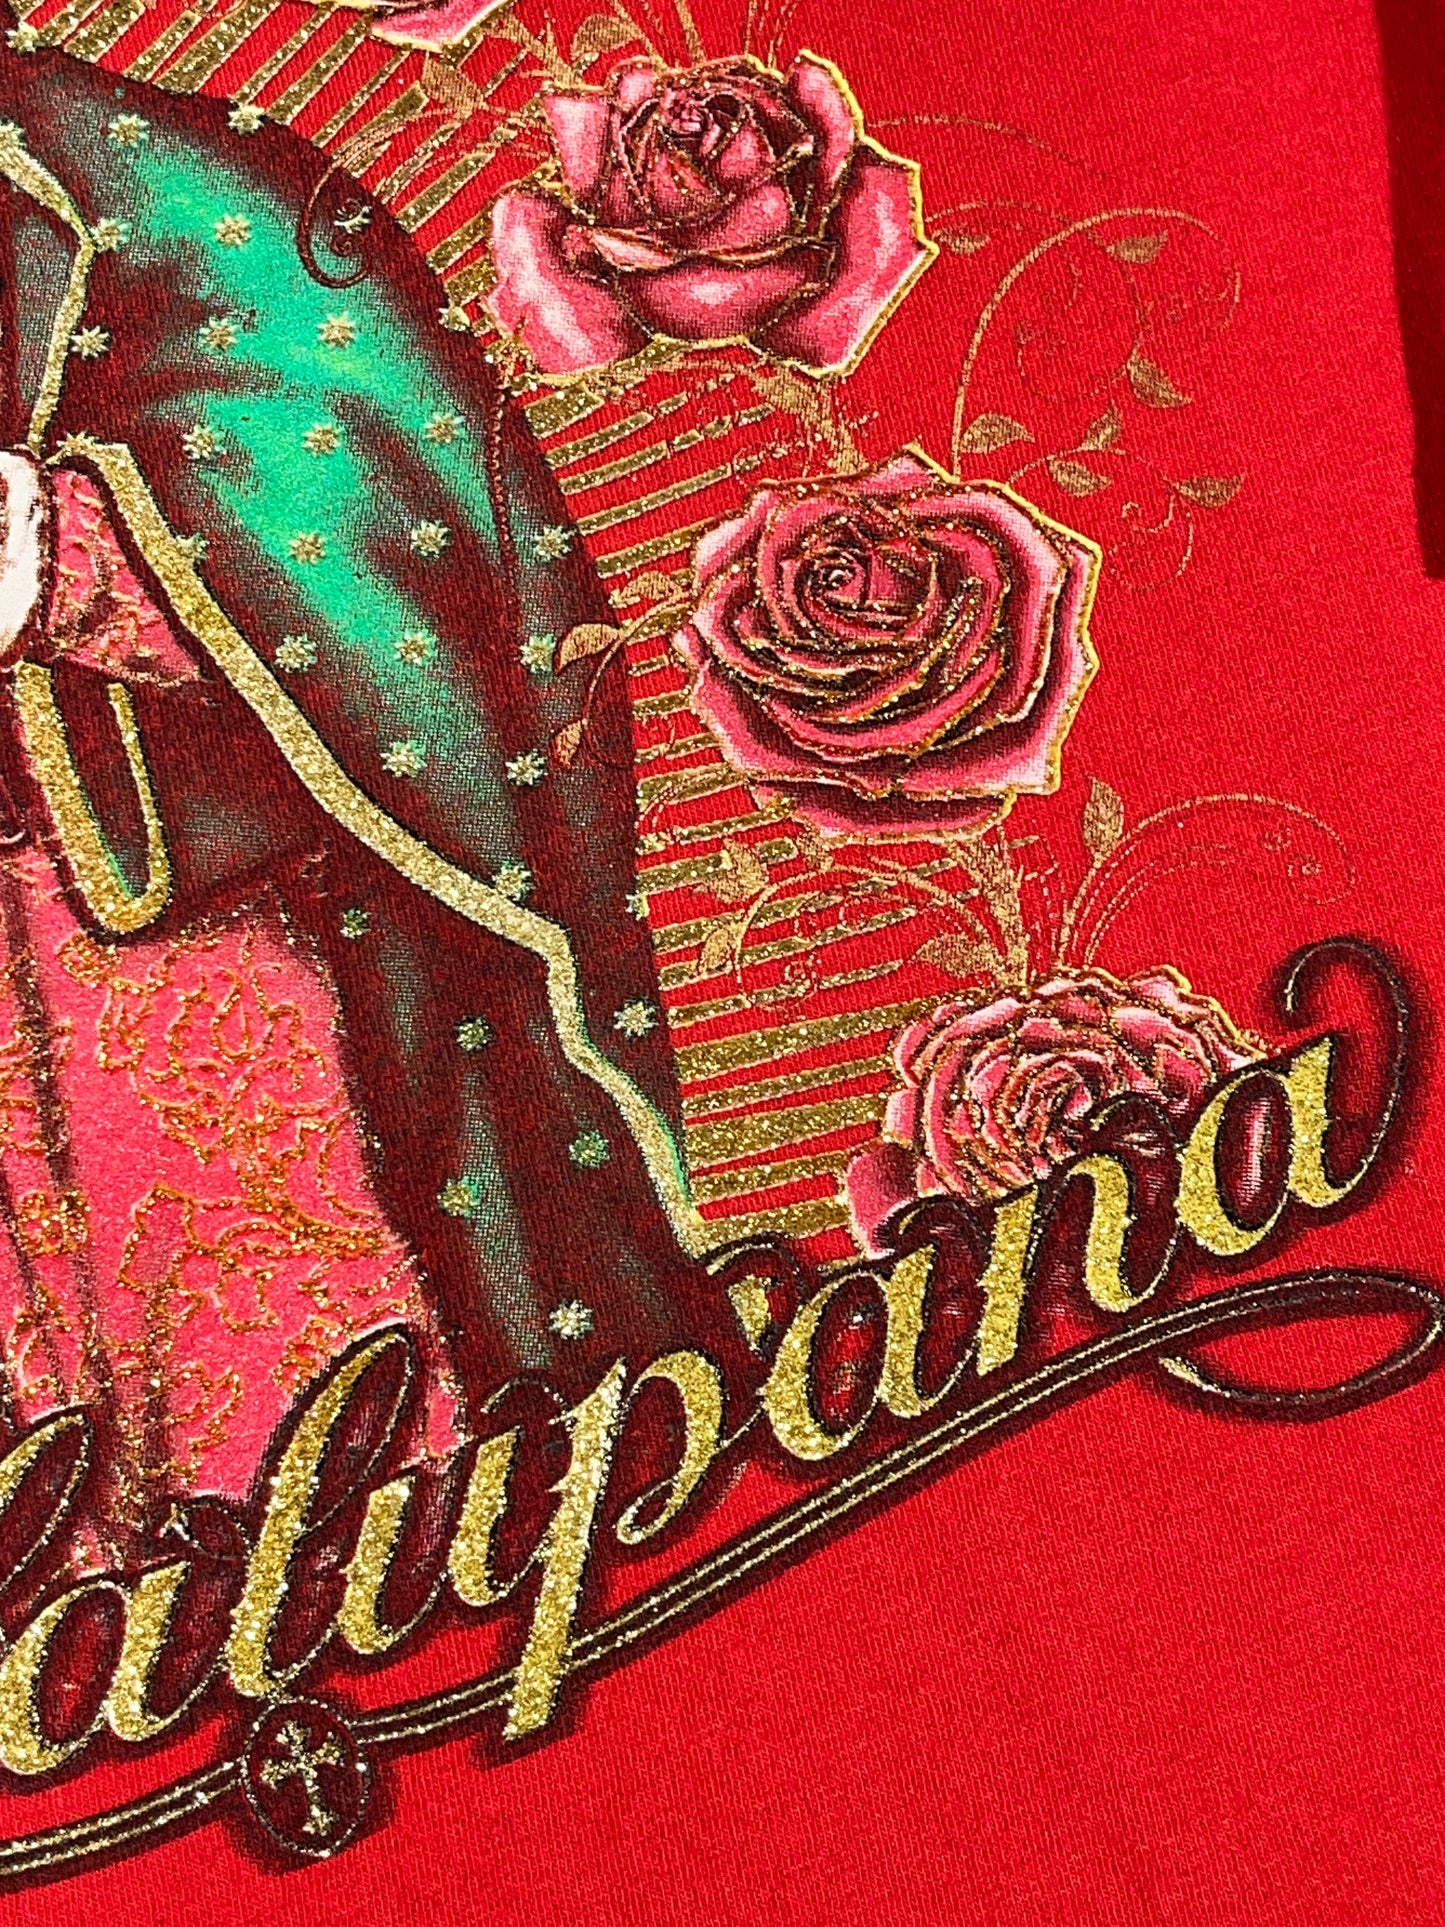 Vintage Guadalupe T-Shirt Our Lady Nuestra Virgen